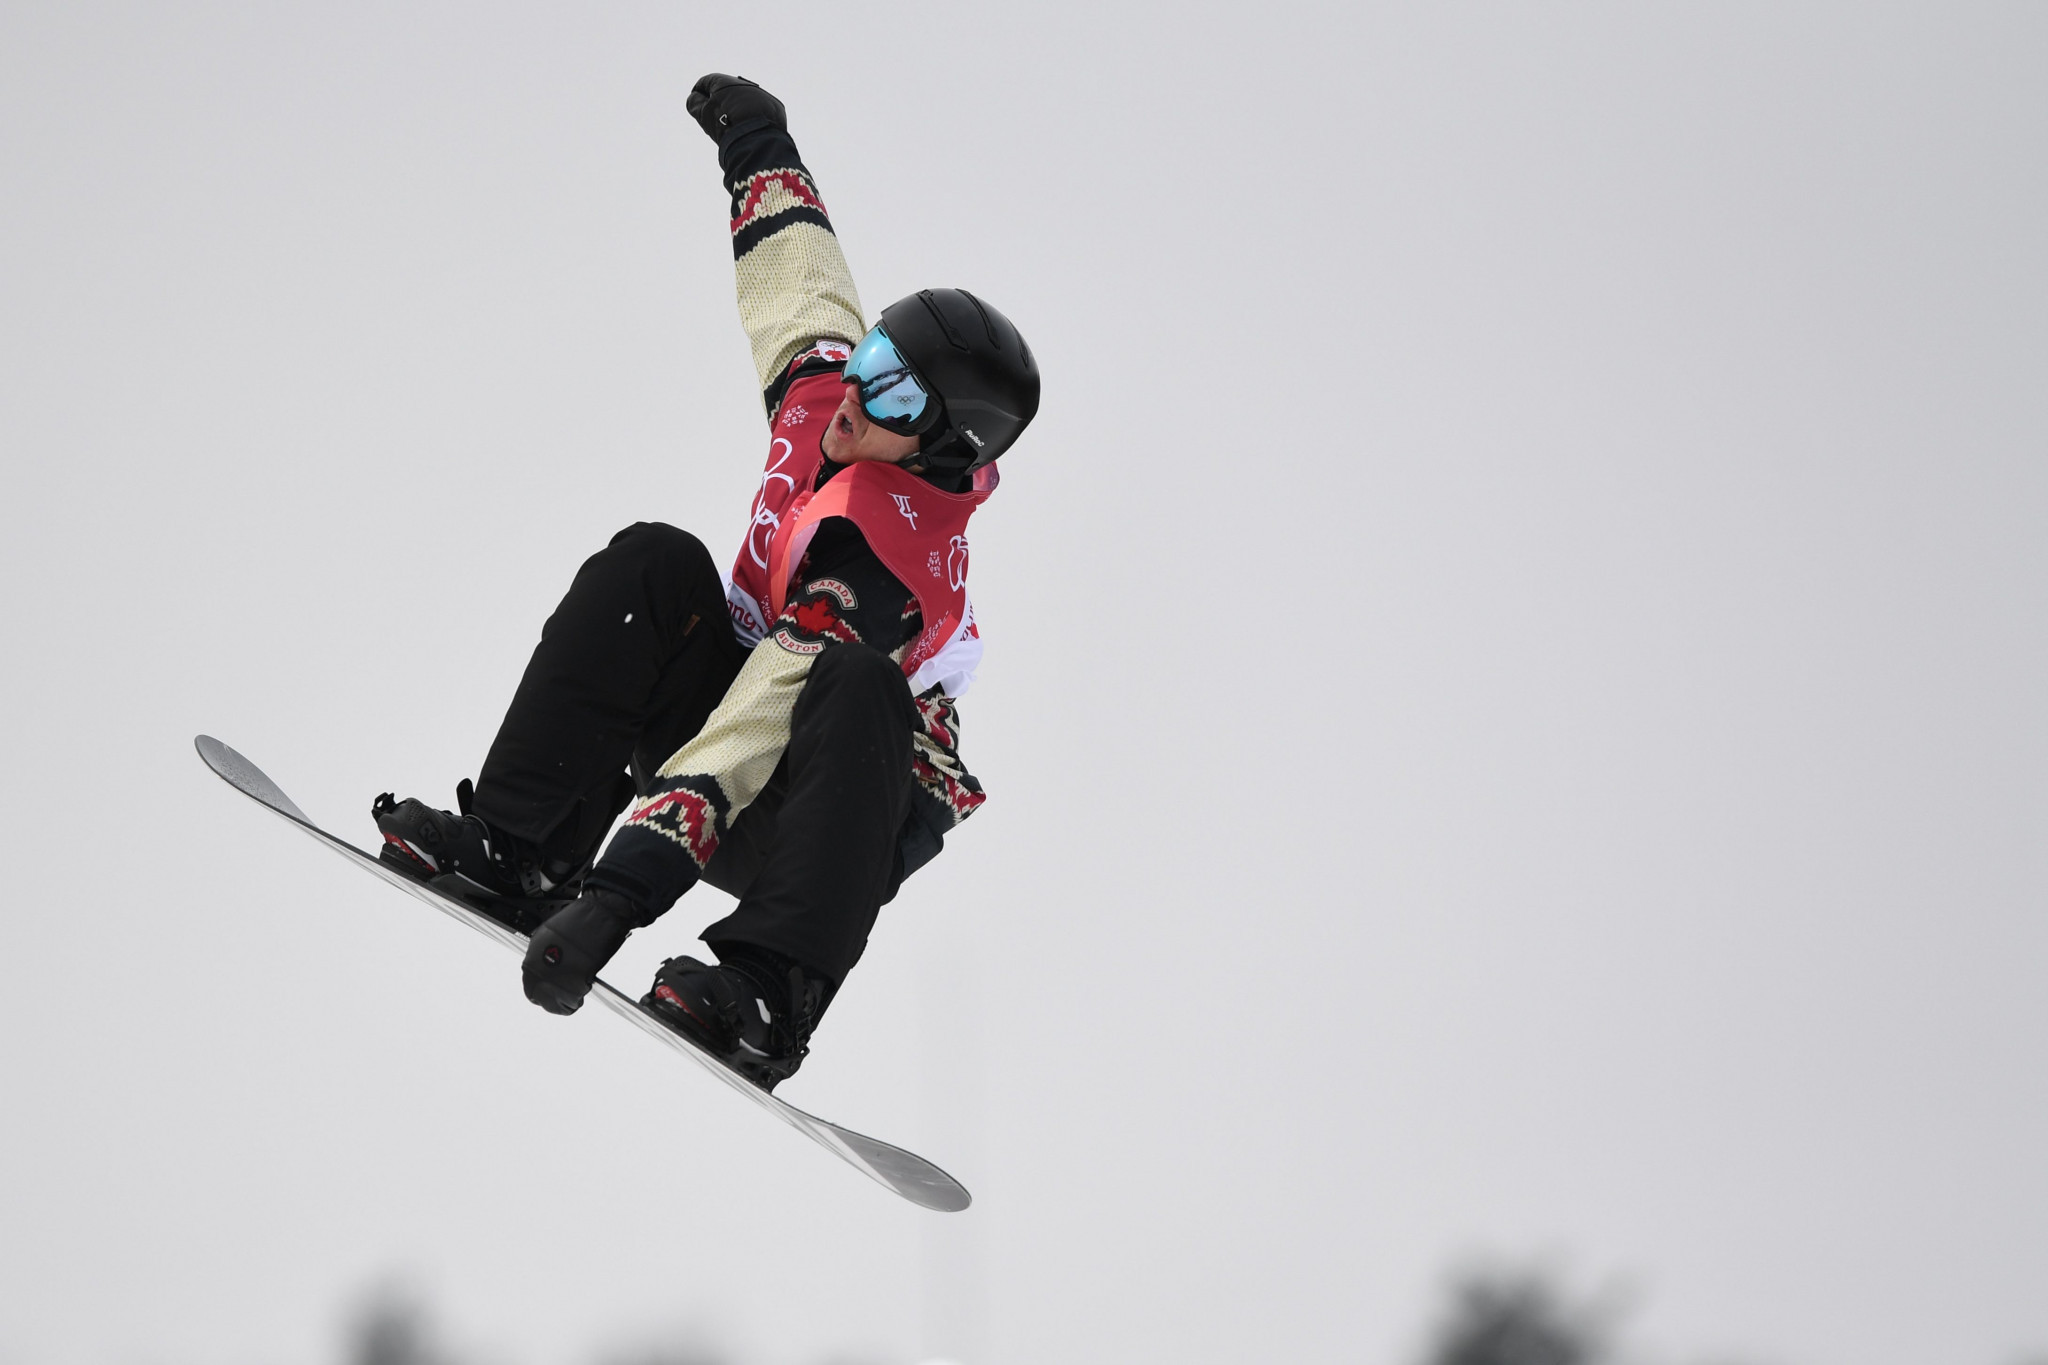 Parrot claims big air triumph on return to action at FIS Snowboard World Cup